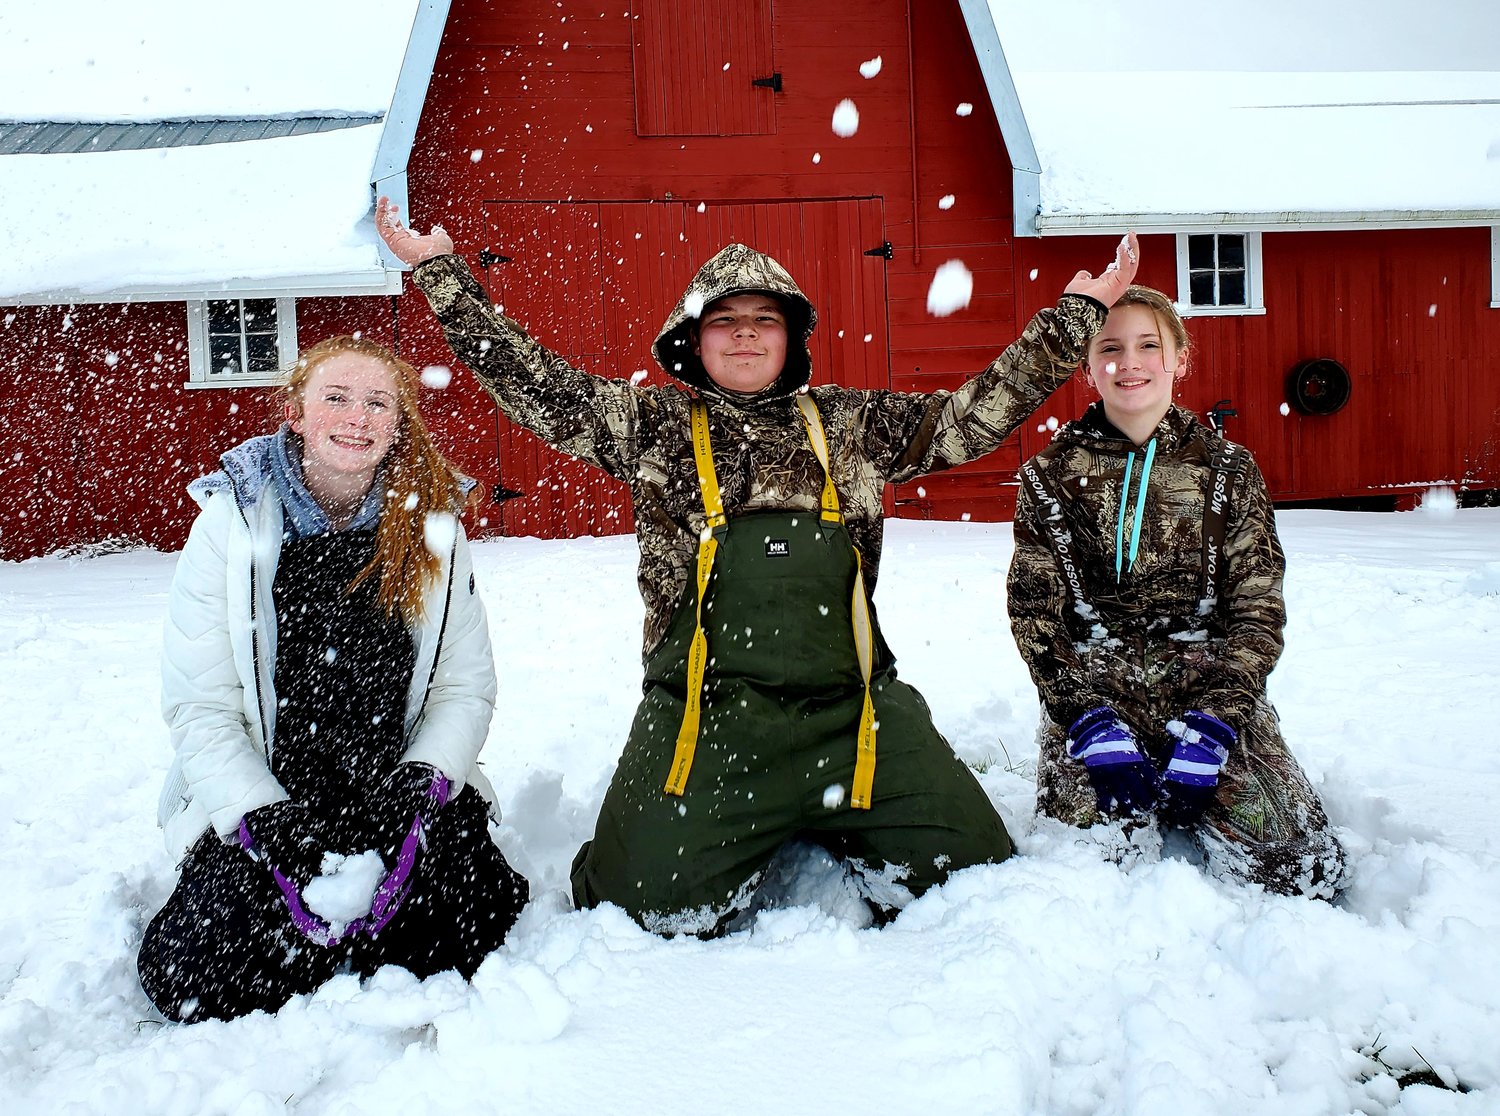 From left to right, Amyah, Bryson and Rayah are pictured enjoying the snow in Winlock in this photograph by their mother, Tara Middleton.